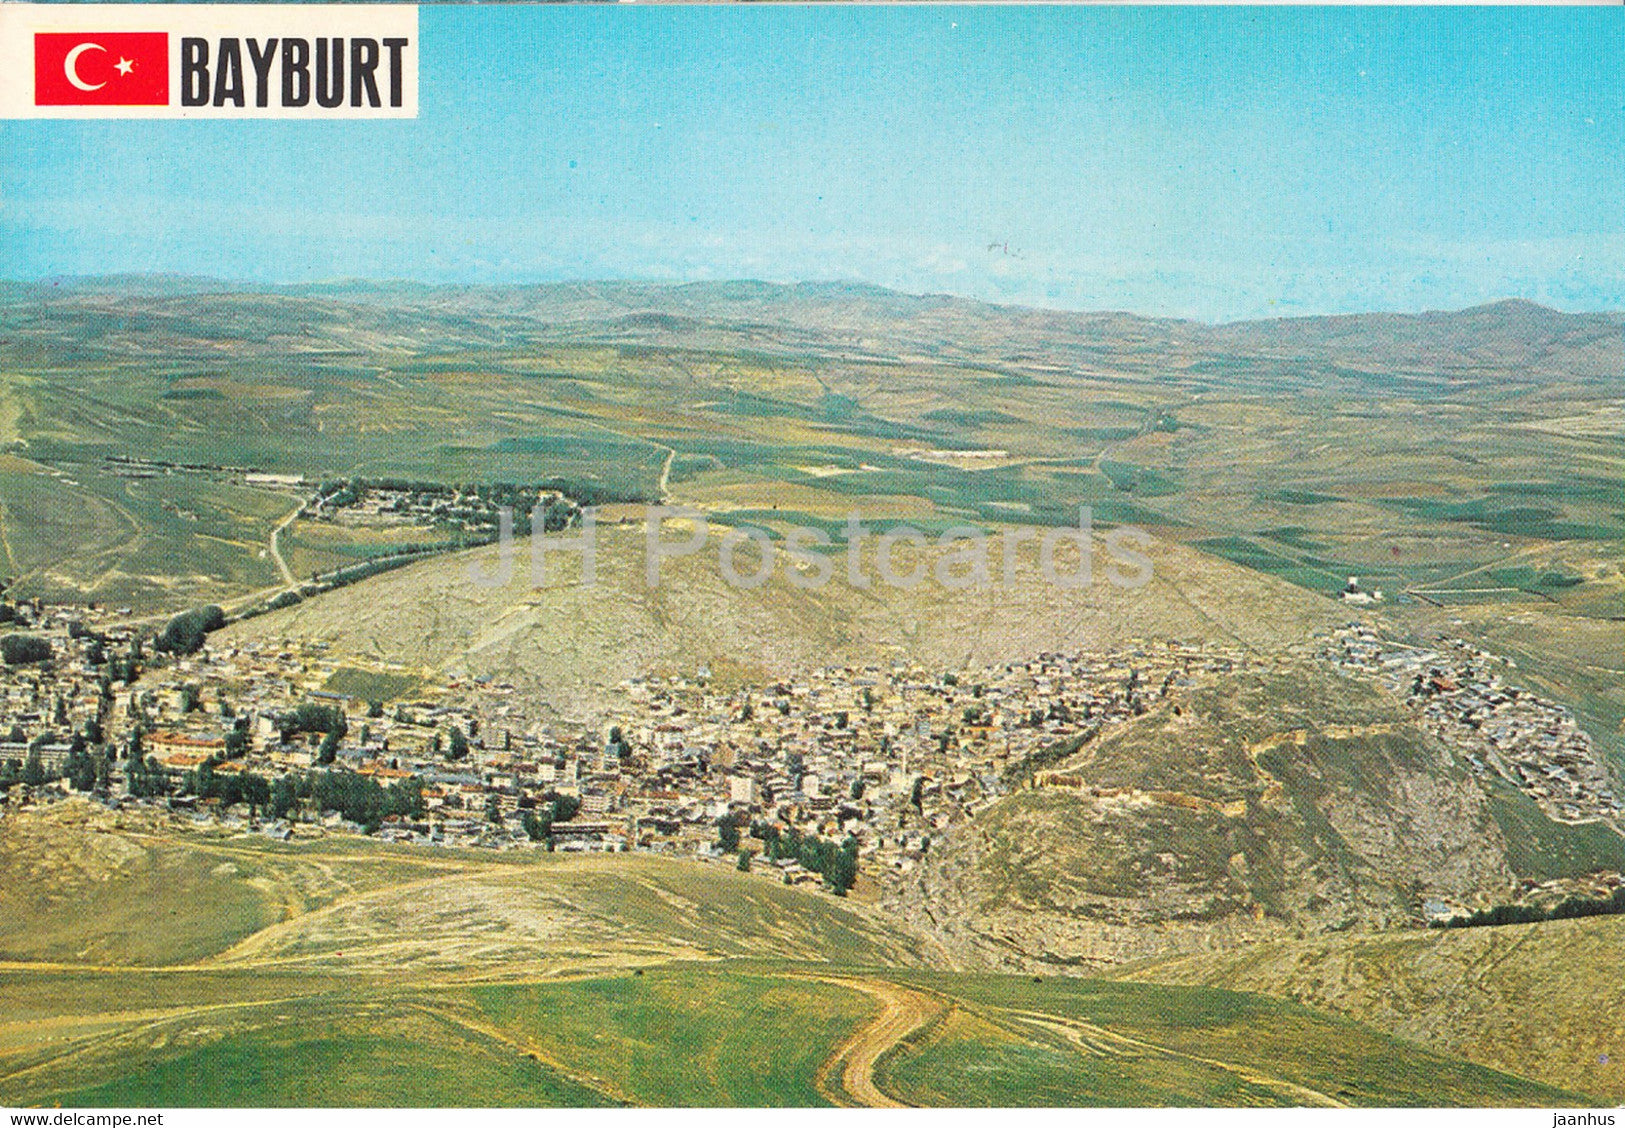 Bayburt - View of the city from Duduzar District - 1987 - Turkey - used - JH Postcards